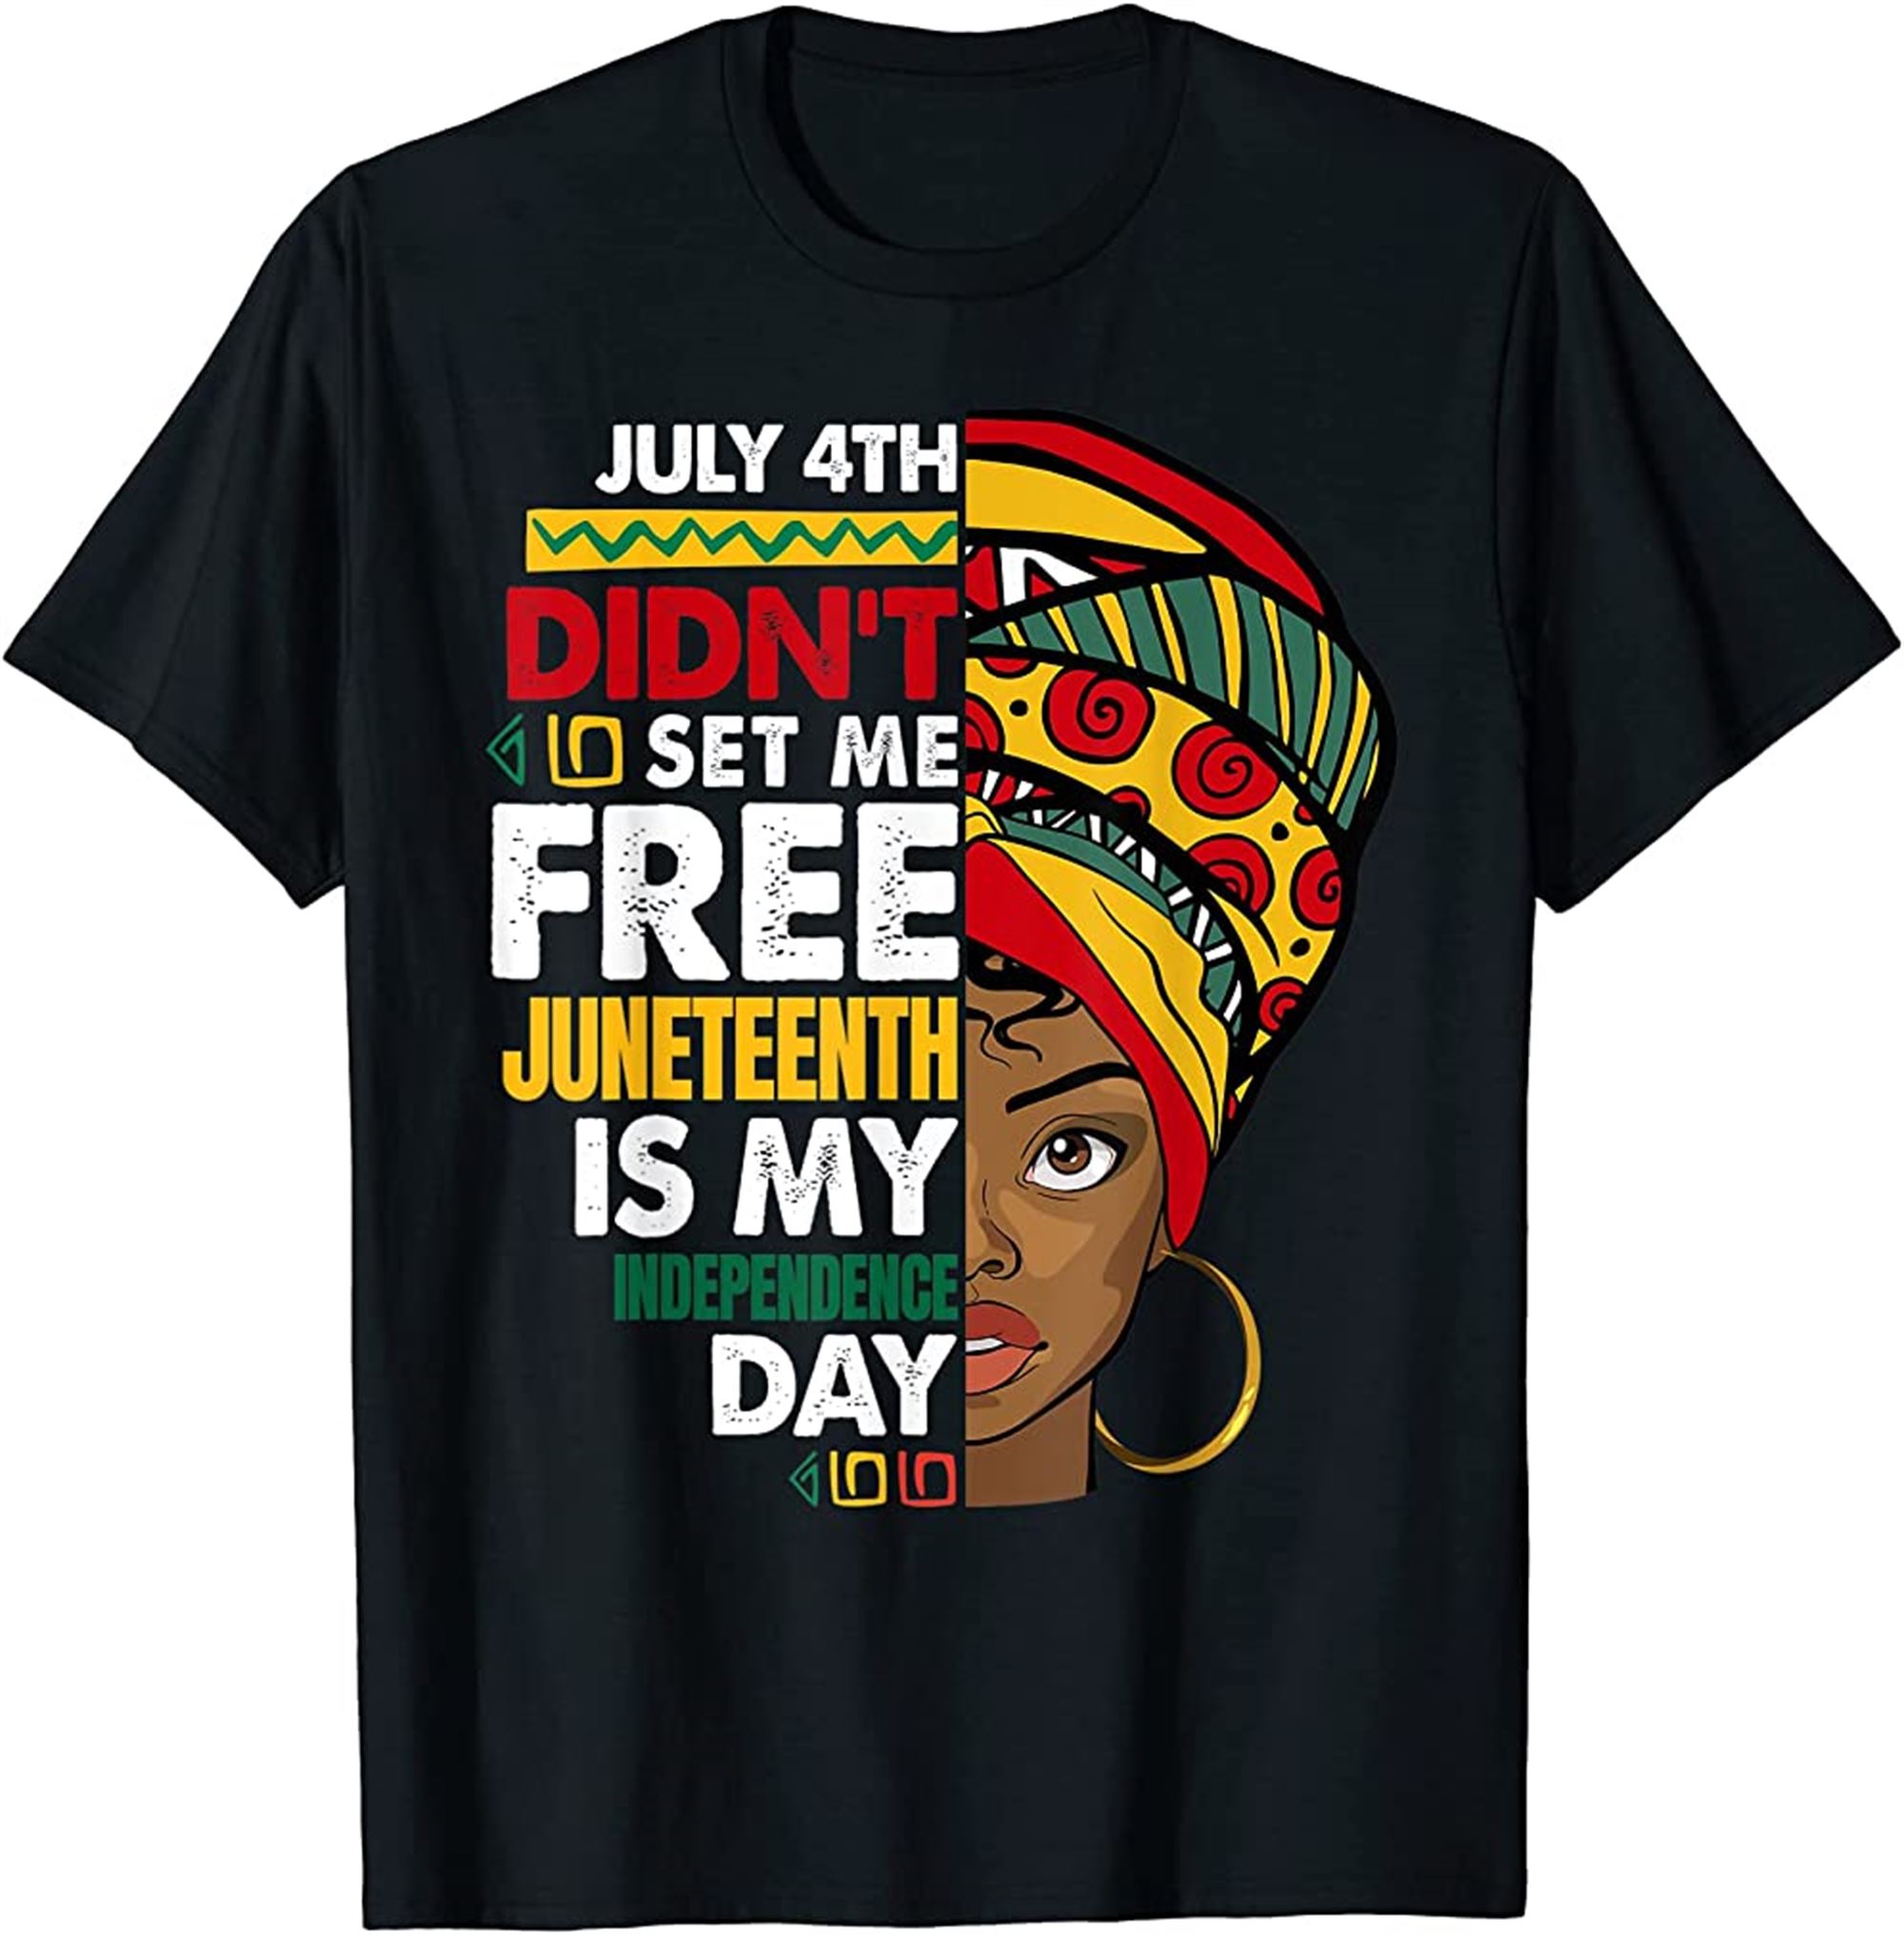 Juneteenth Is My Independence Day Not July 4th Black Woman T-shirt Size Up To 5xl